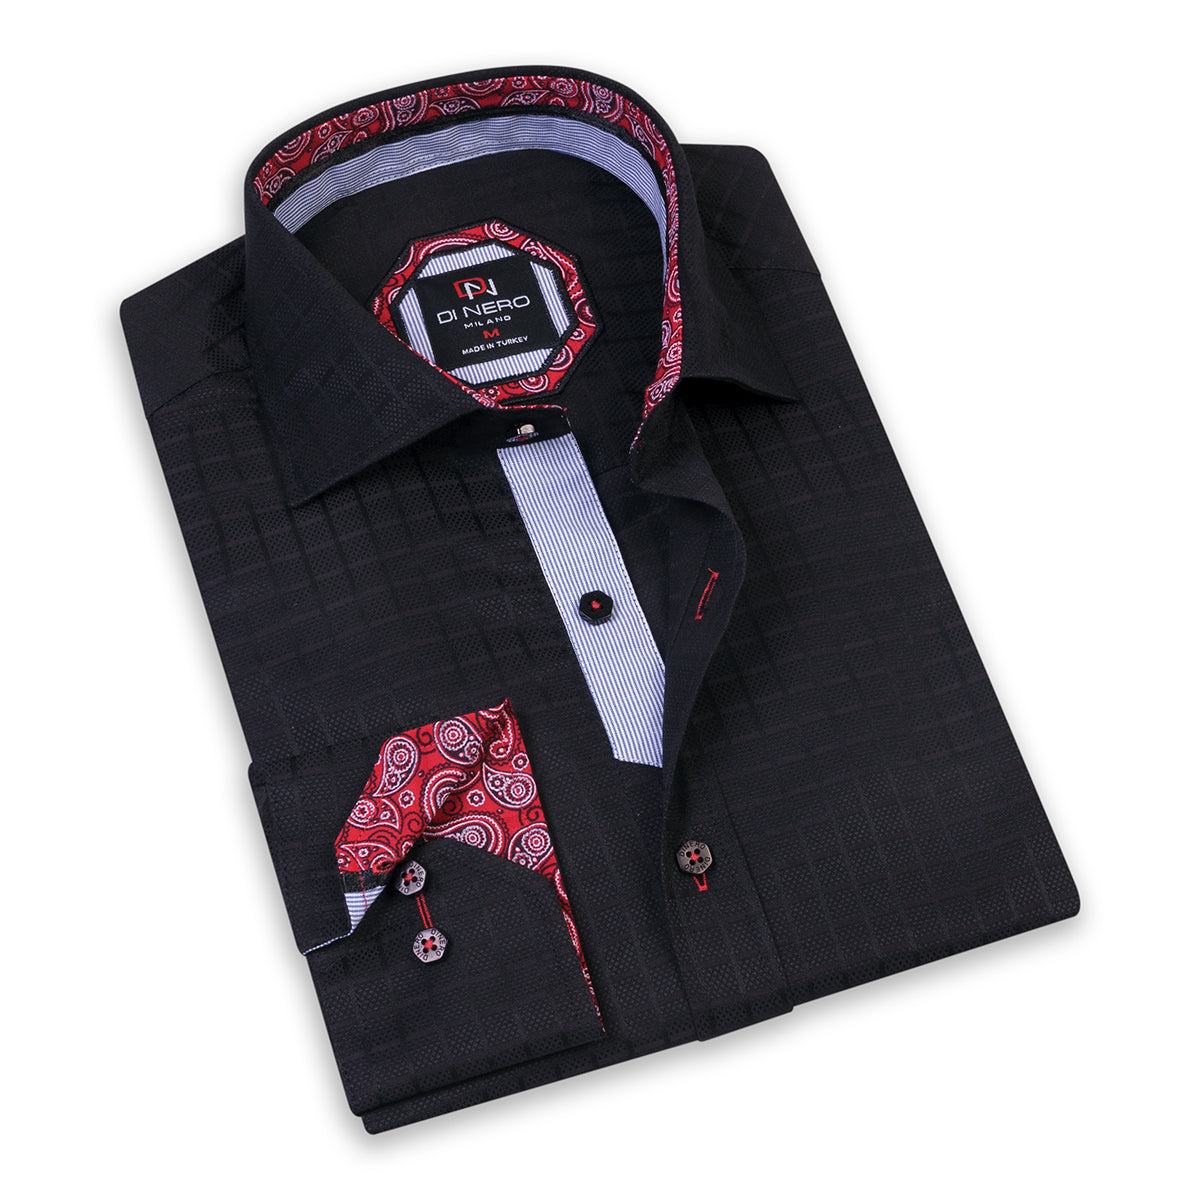 This Di Nero black dress shirt is a versatile men's top that can be worn in any setting. With a soft, checkered cotton fabric, it can be worn with a tie and sport jacket, or black DFR89 denim jeans and left open-collared.